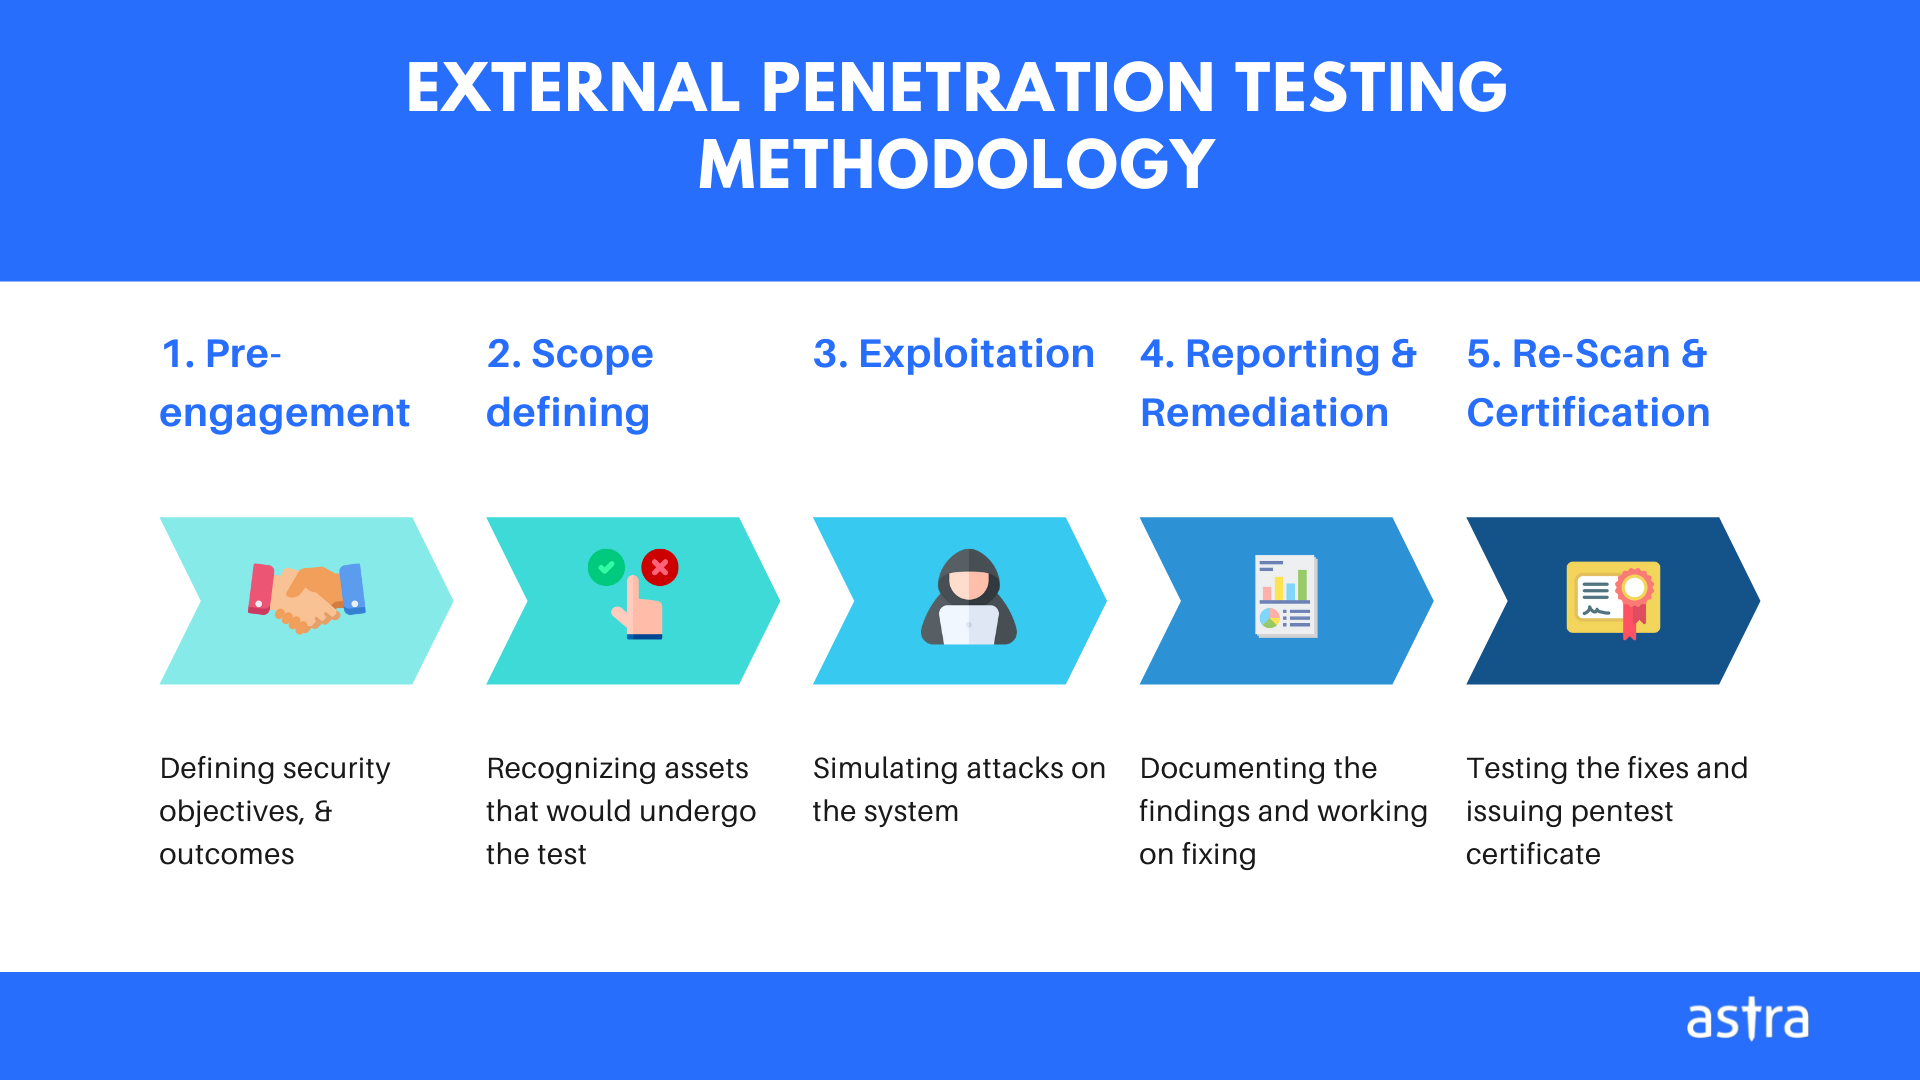 Stages in external penetration testing